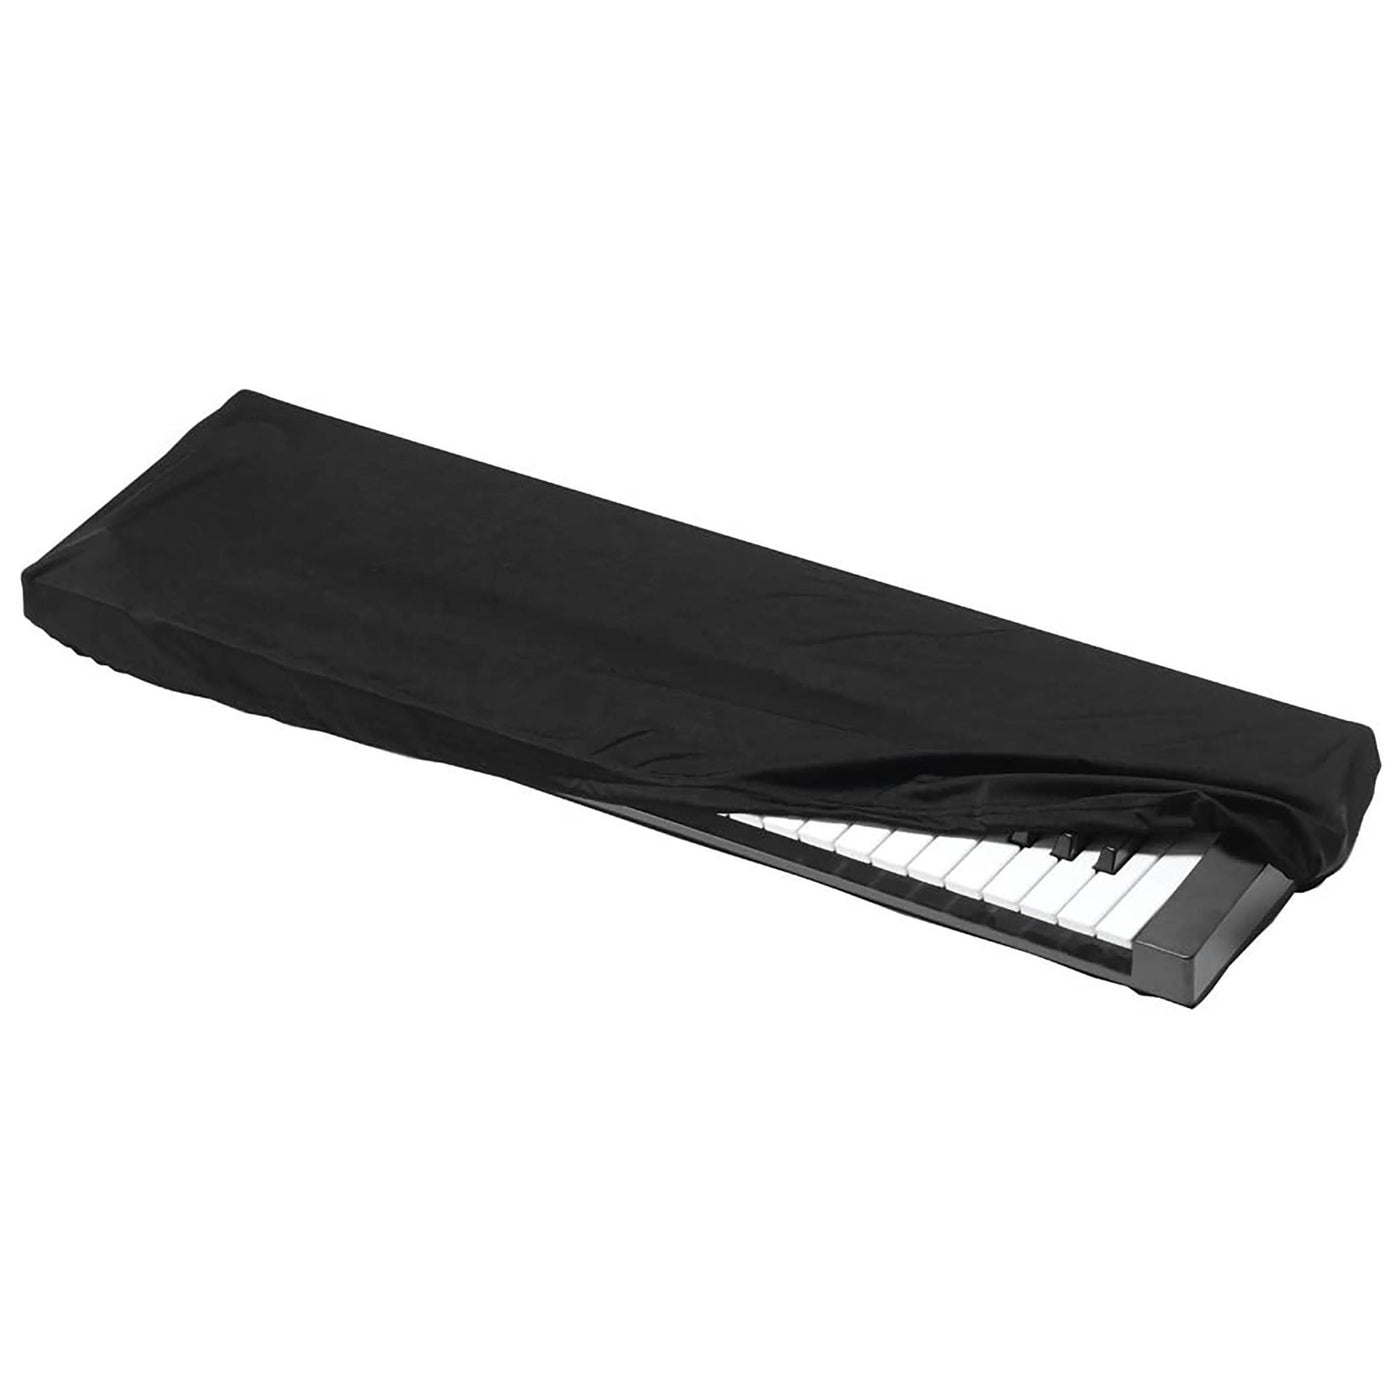 Kaces Keyboard Dust Cover - Small